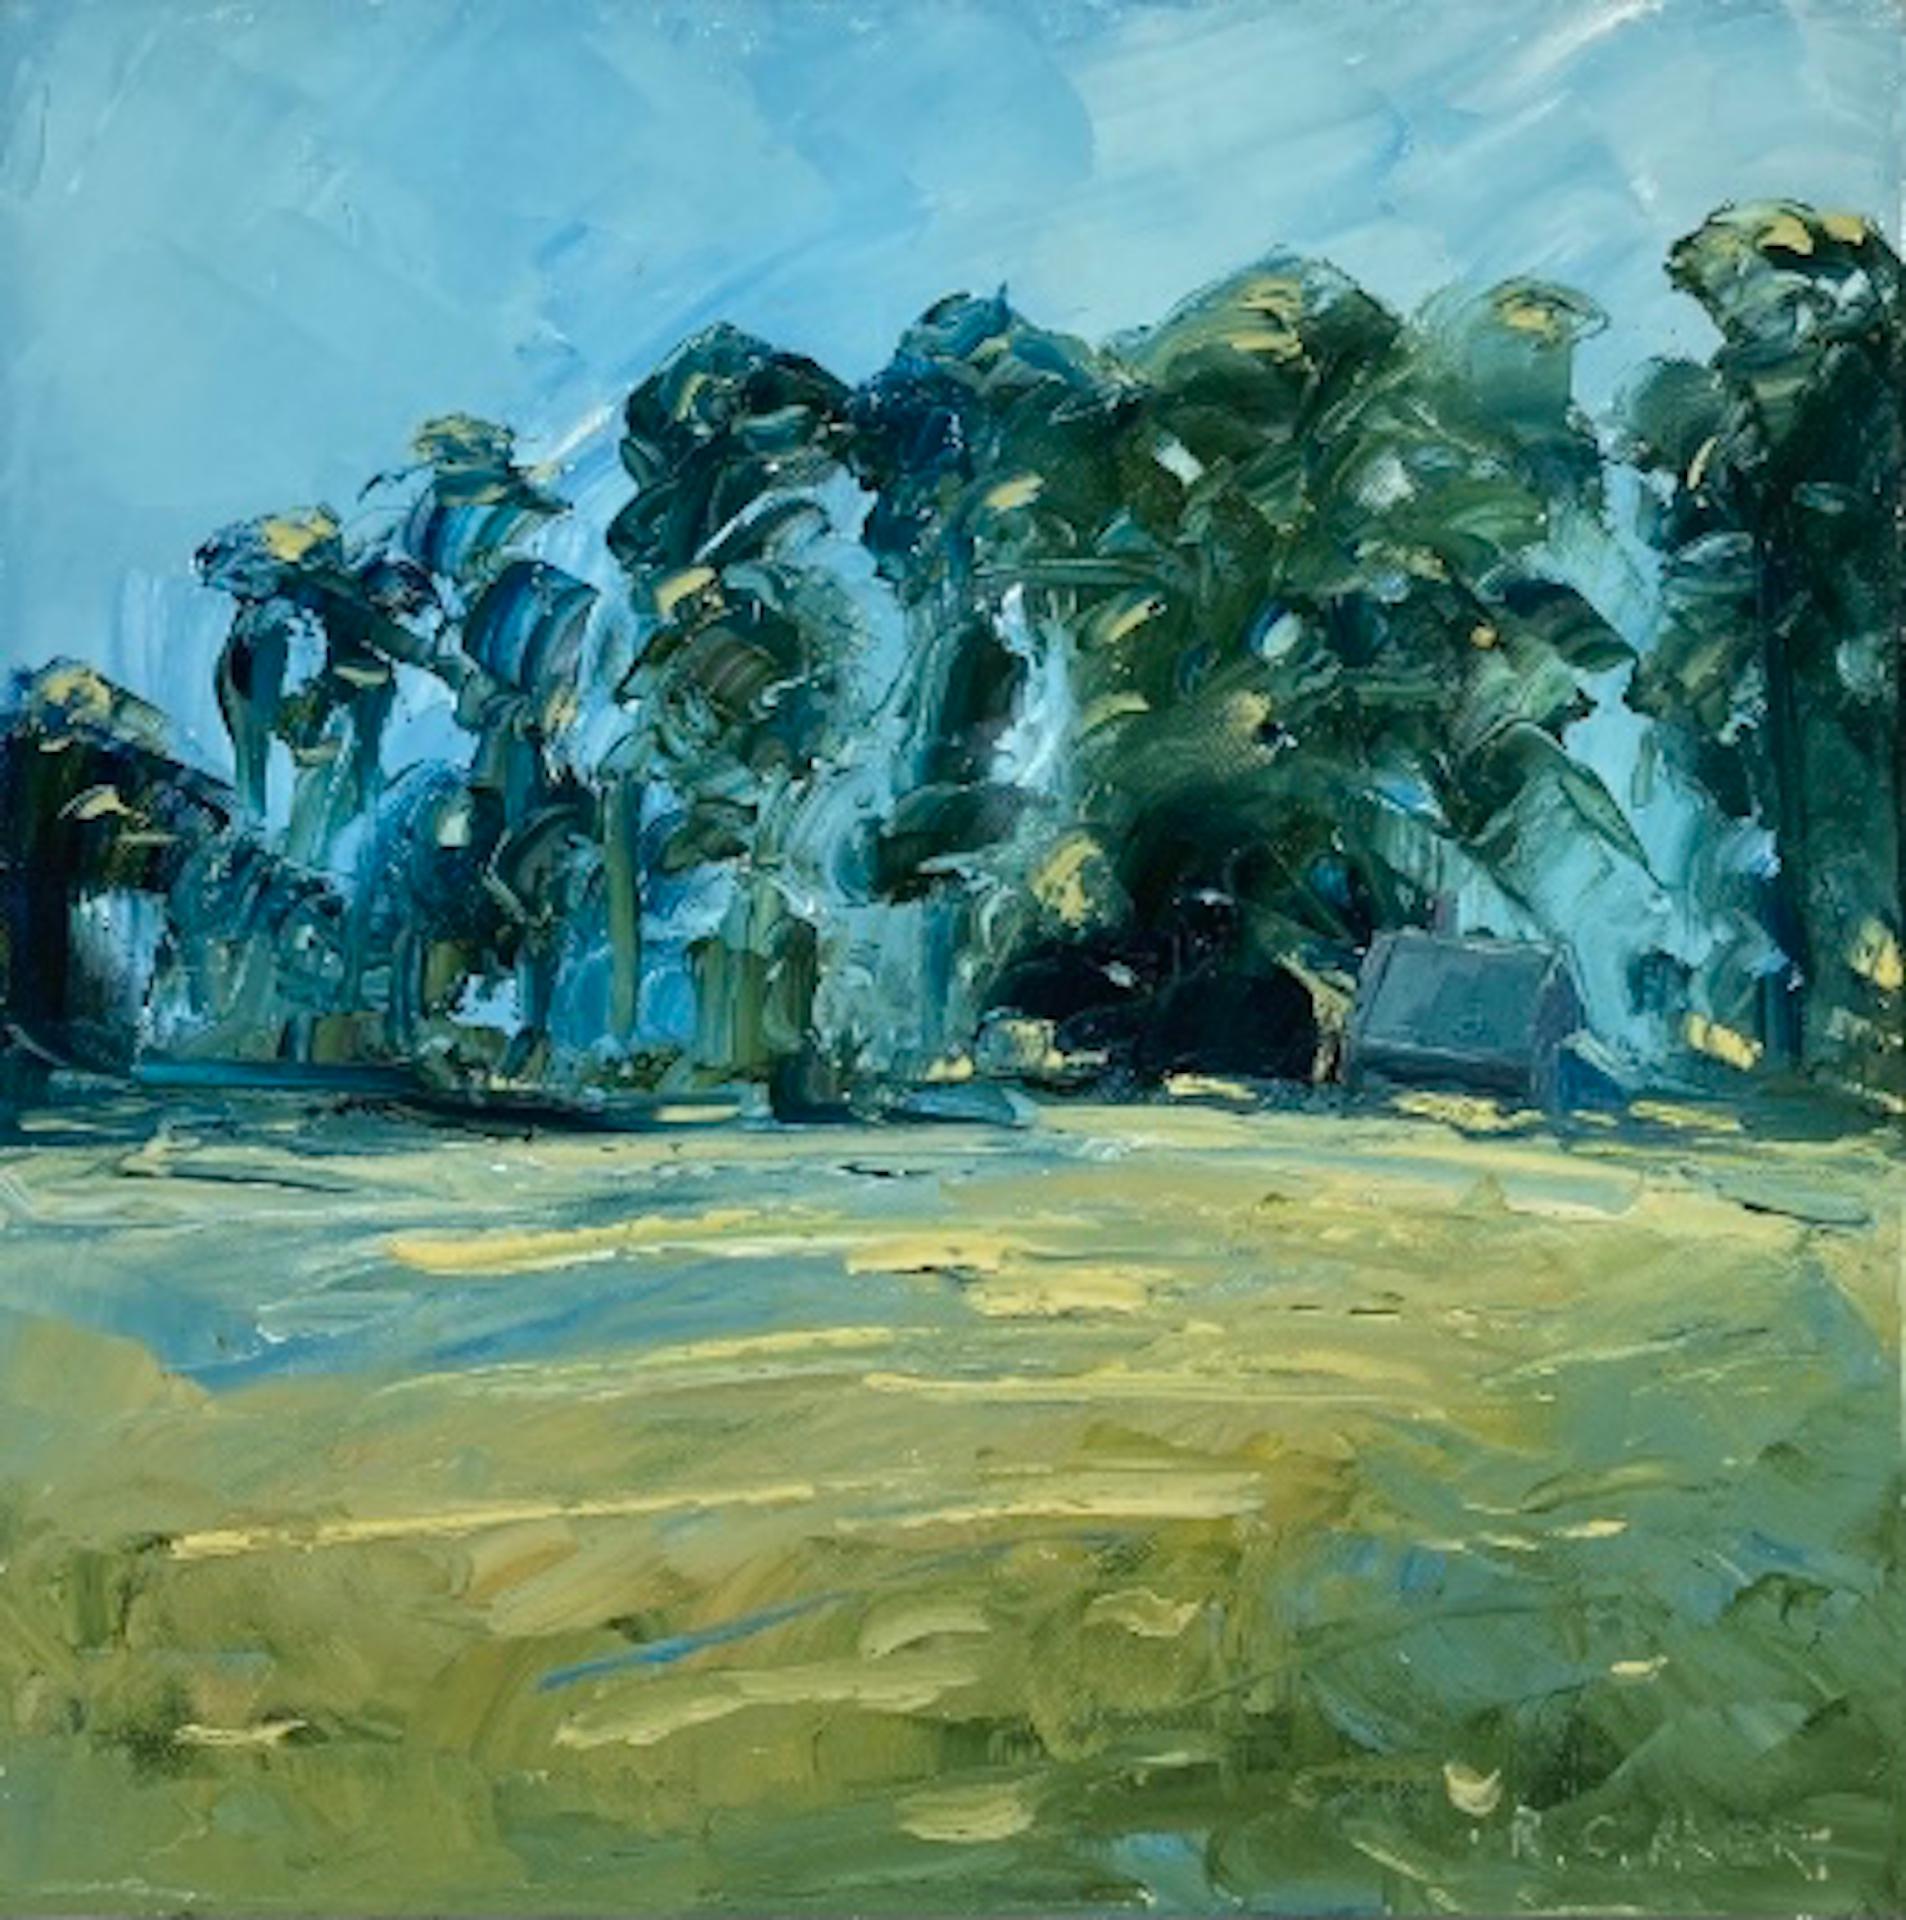 Great Tew, Summer [2020]
Original
Landscape
Oil paint on canvas
Image size: H:40 cm x W:40 cm
Framed Size: H:43 cm x W:43 cm x D:3.5cm
Sold Framed
Please note that insitu images are purely an indication of how a piece may look

A summer view to a